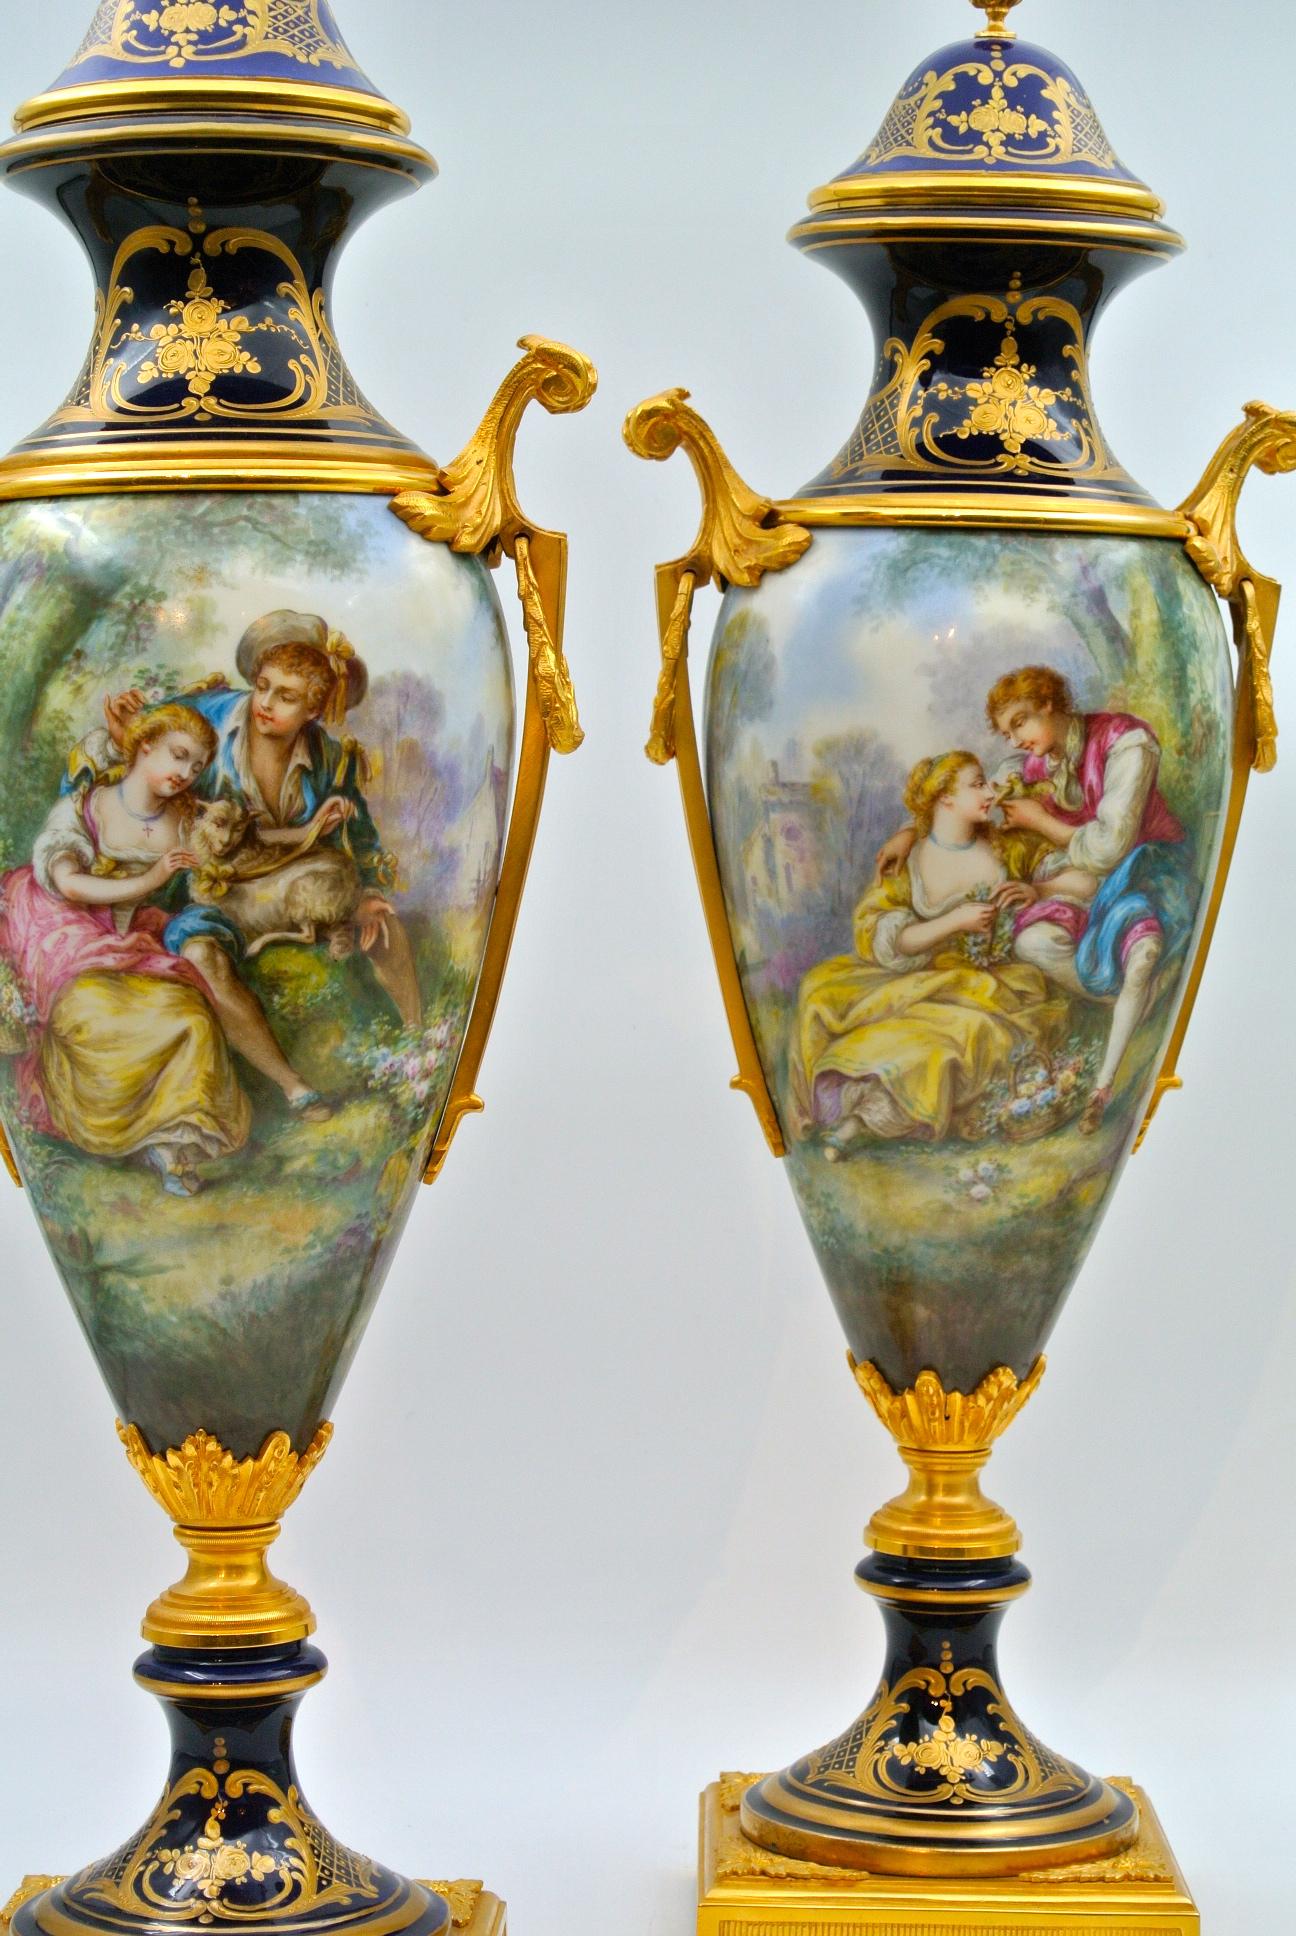 Pair of covered vases in Sèvres Porcelain and gilt bronze, Napoleon III period, 19th century.
Measures: H 63 cm, W 23 cm, D 18 cm.